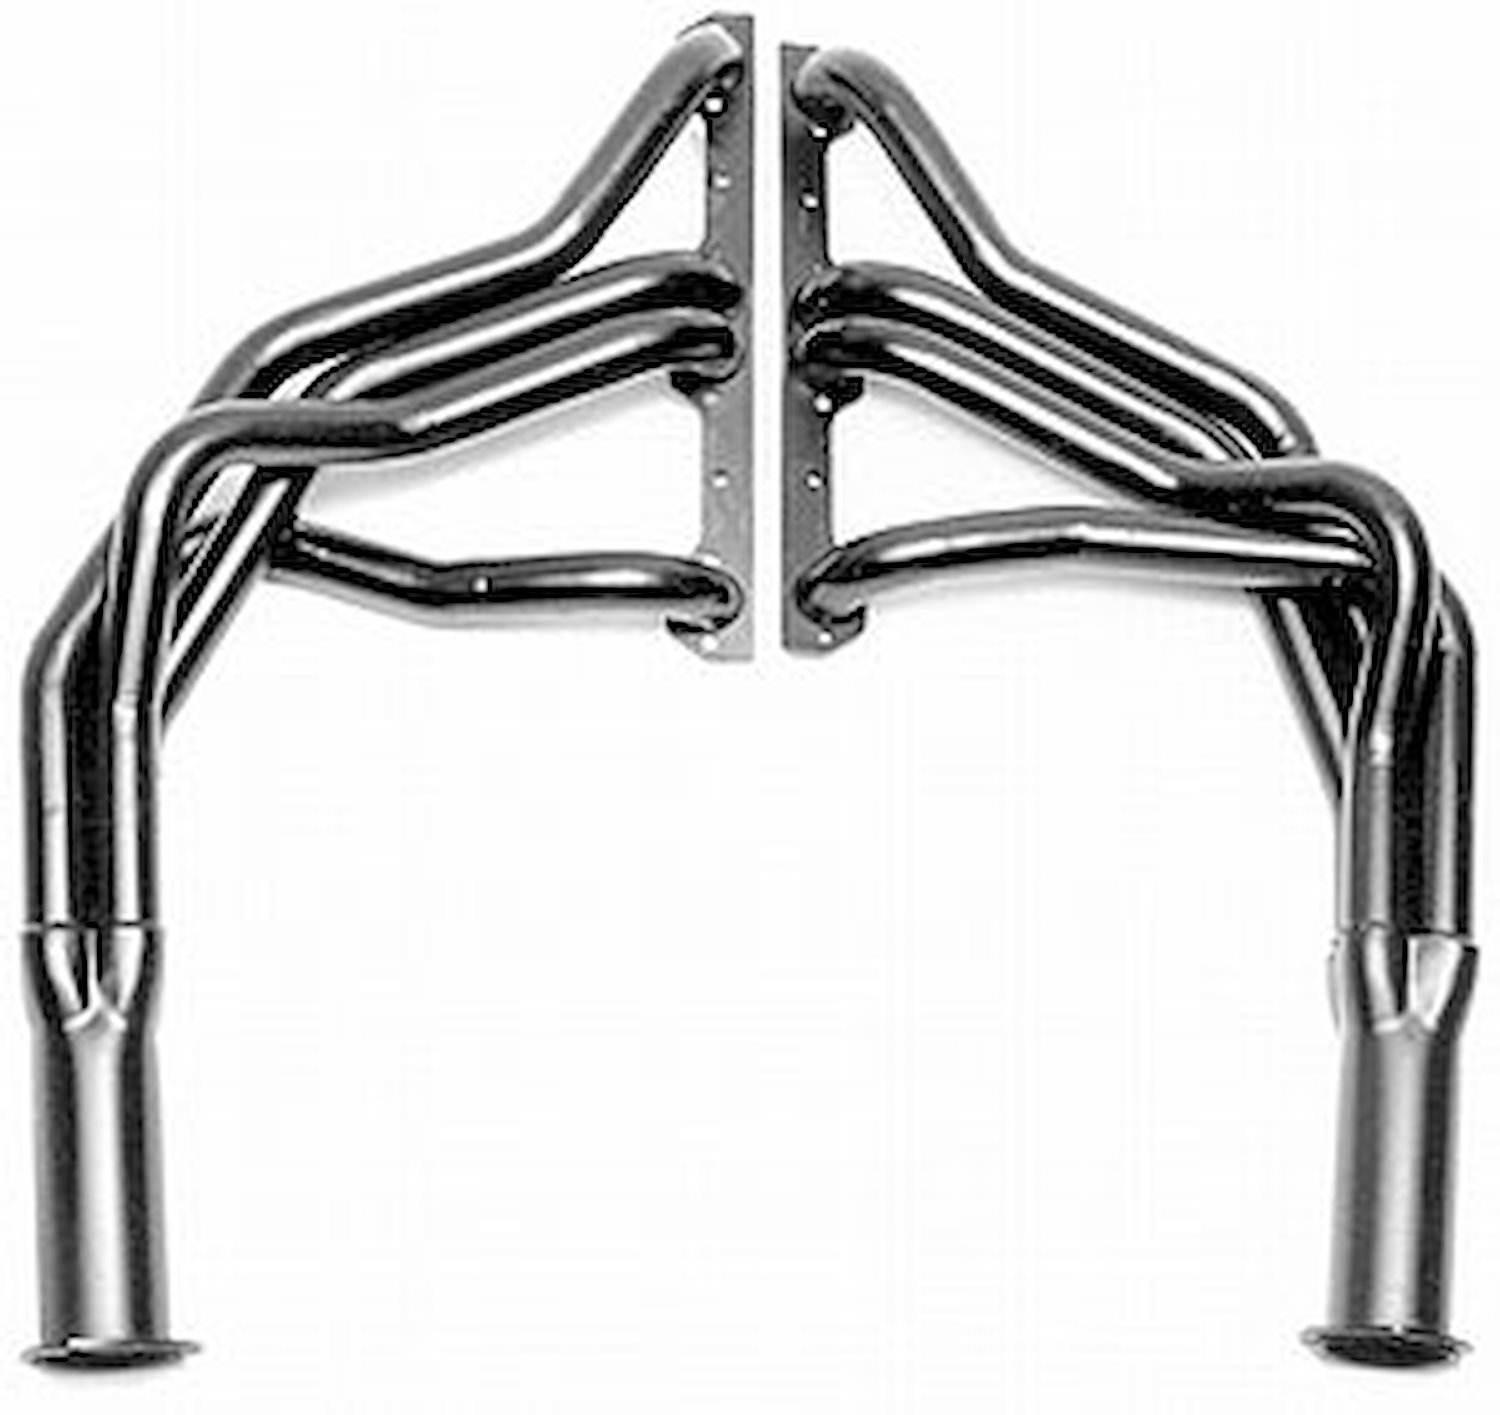 Standard Duty Uncoated Full Length Headers for 1971-91 G10,G20,G30, CLASS C MOTORHOMES 283-400